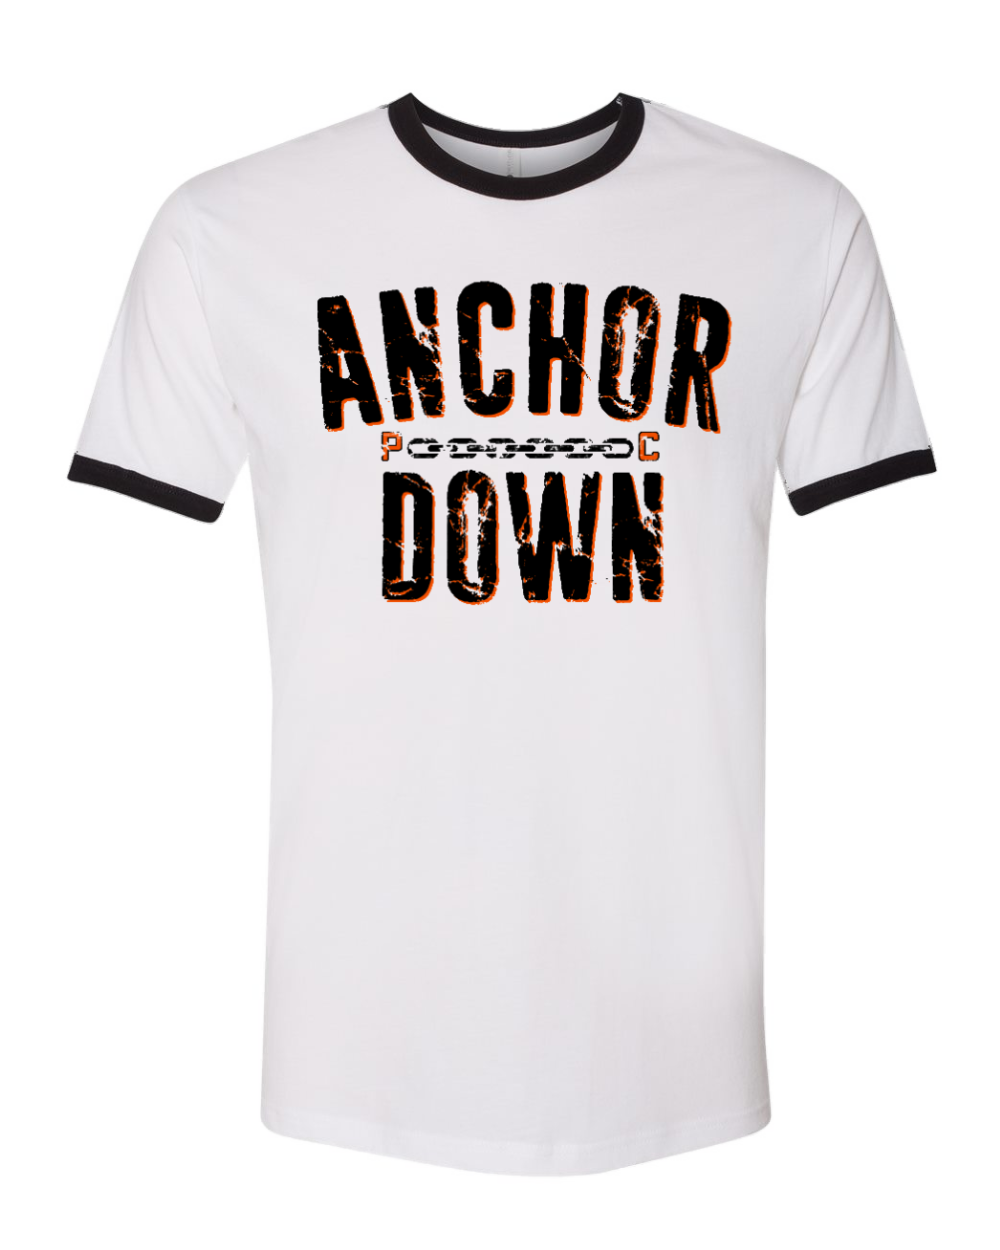 Anchor Down Ringer Tee (Adult)